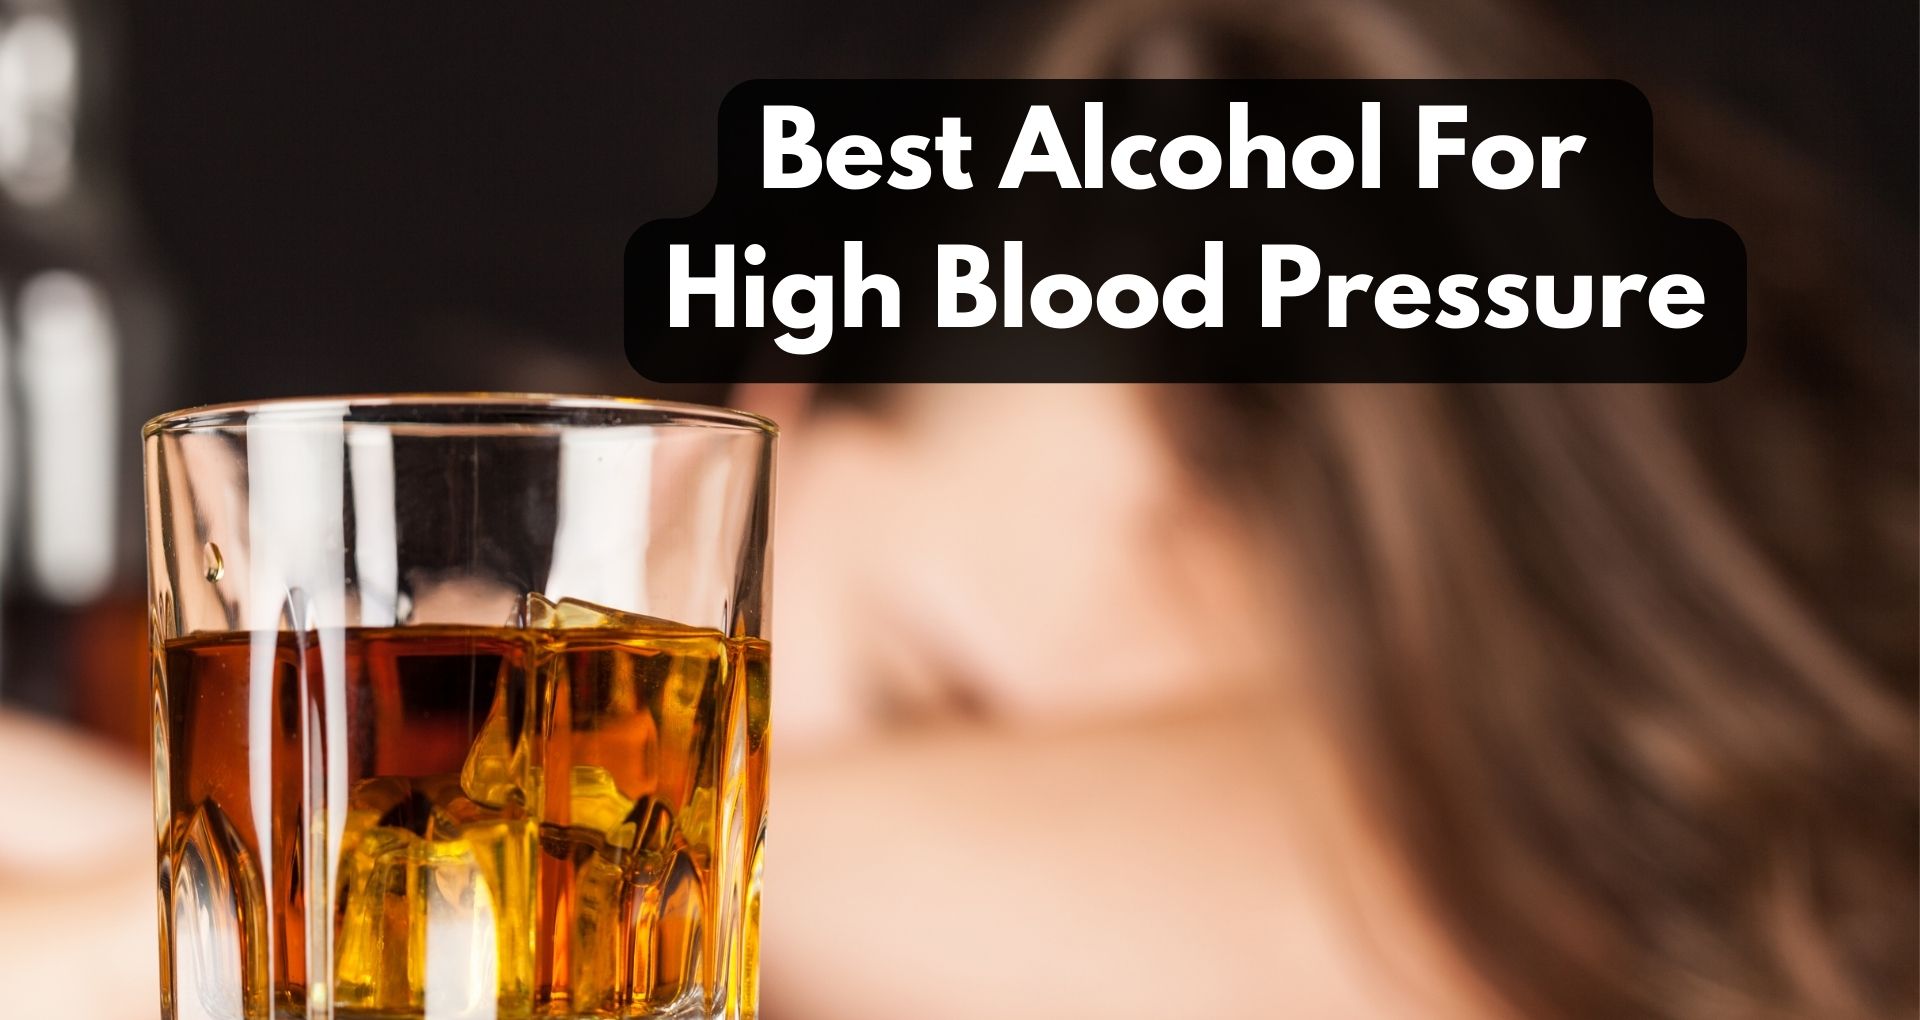 Best Alcohol For High Blood Pressure